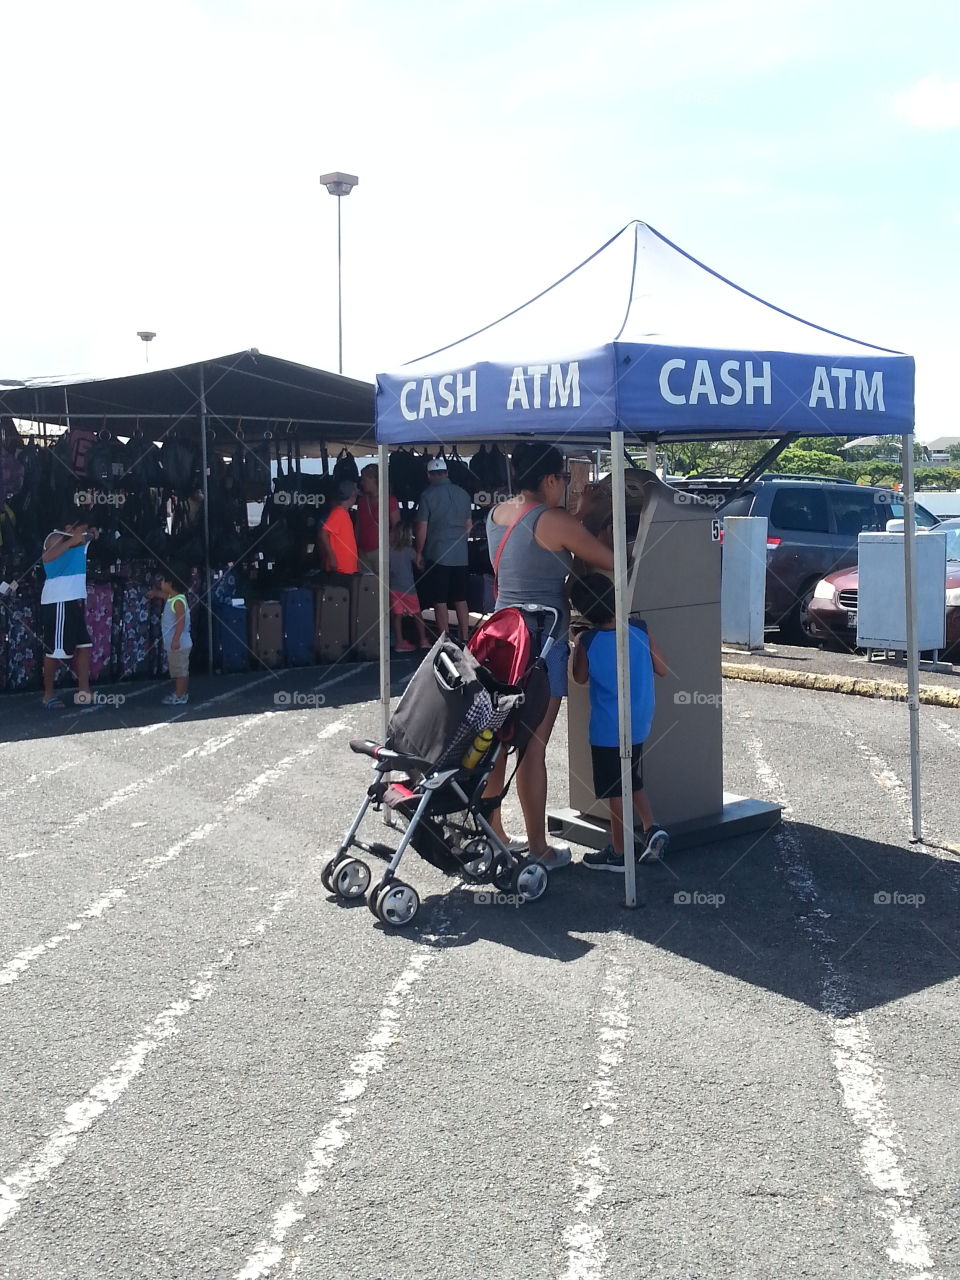 Anywhere ATM's. At a flea market where money can be easily accessible from a portable atm